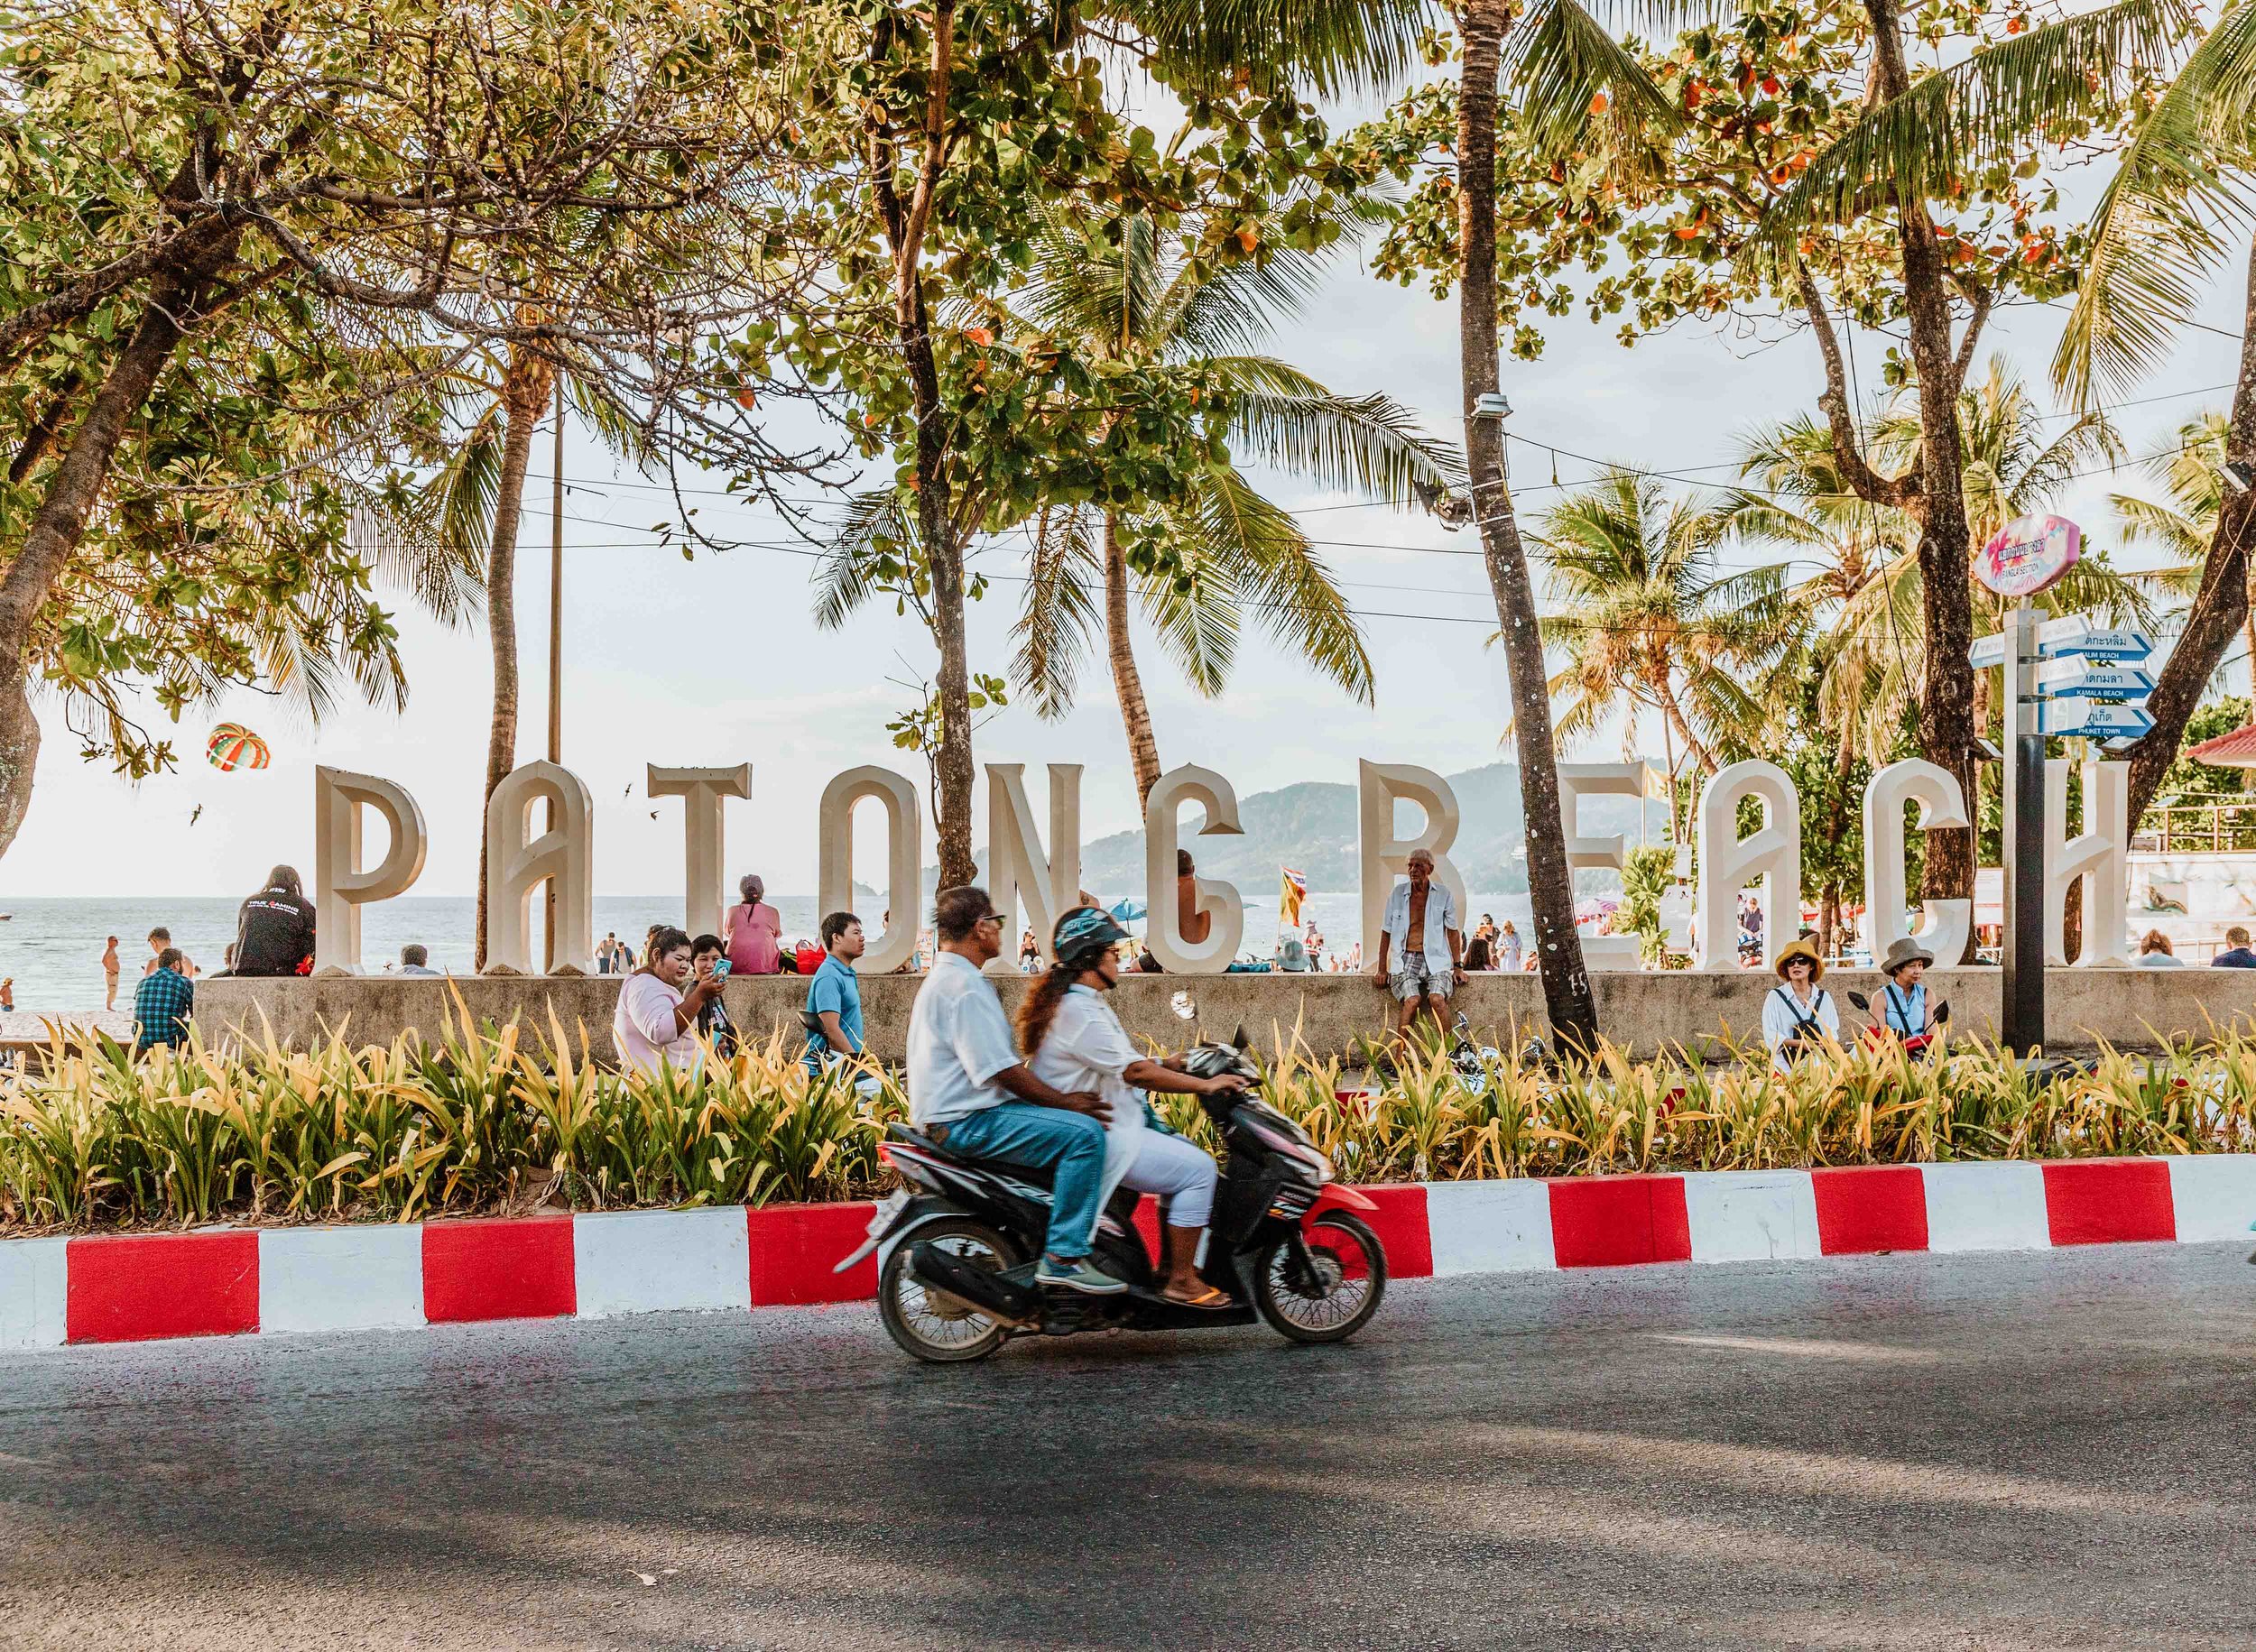 People on a motorbike passing by the Patong Beach sign on a phuket travel itinerary